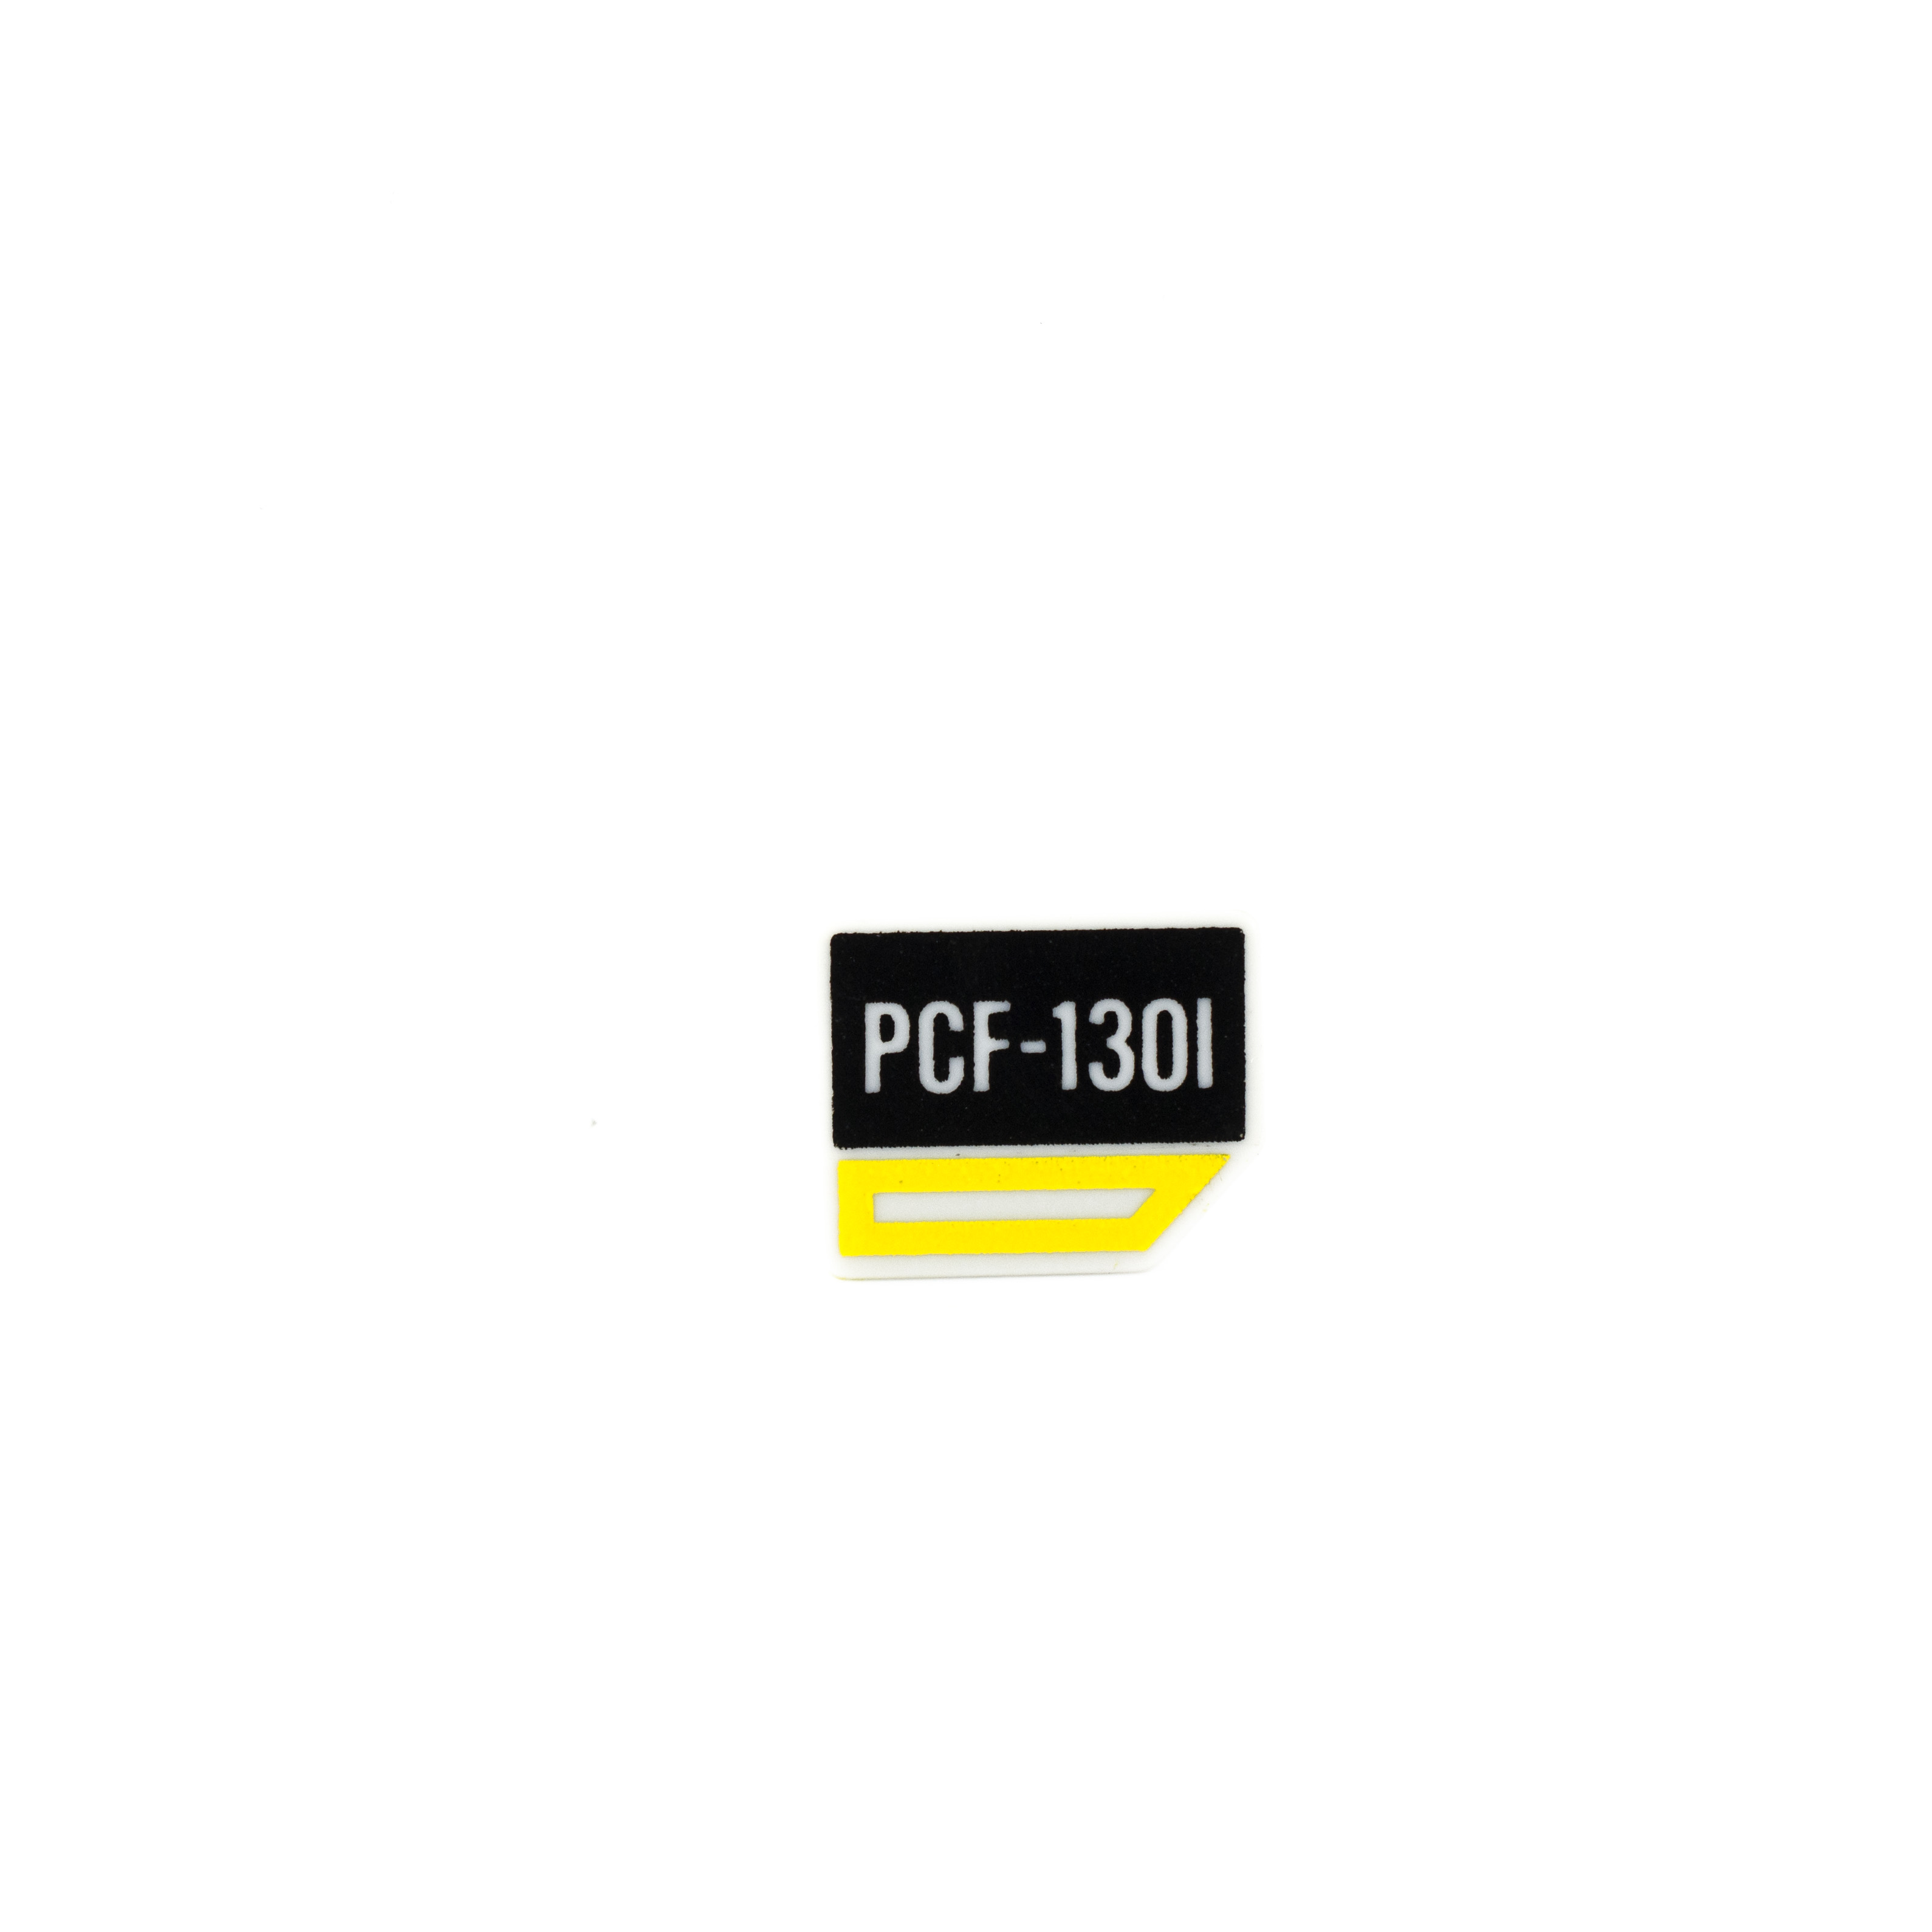 OEM Nameplate: Control Grip - PCF-130I